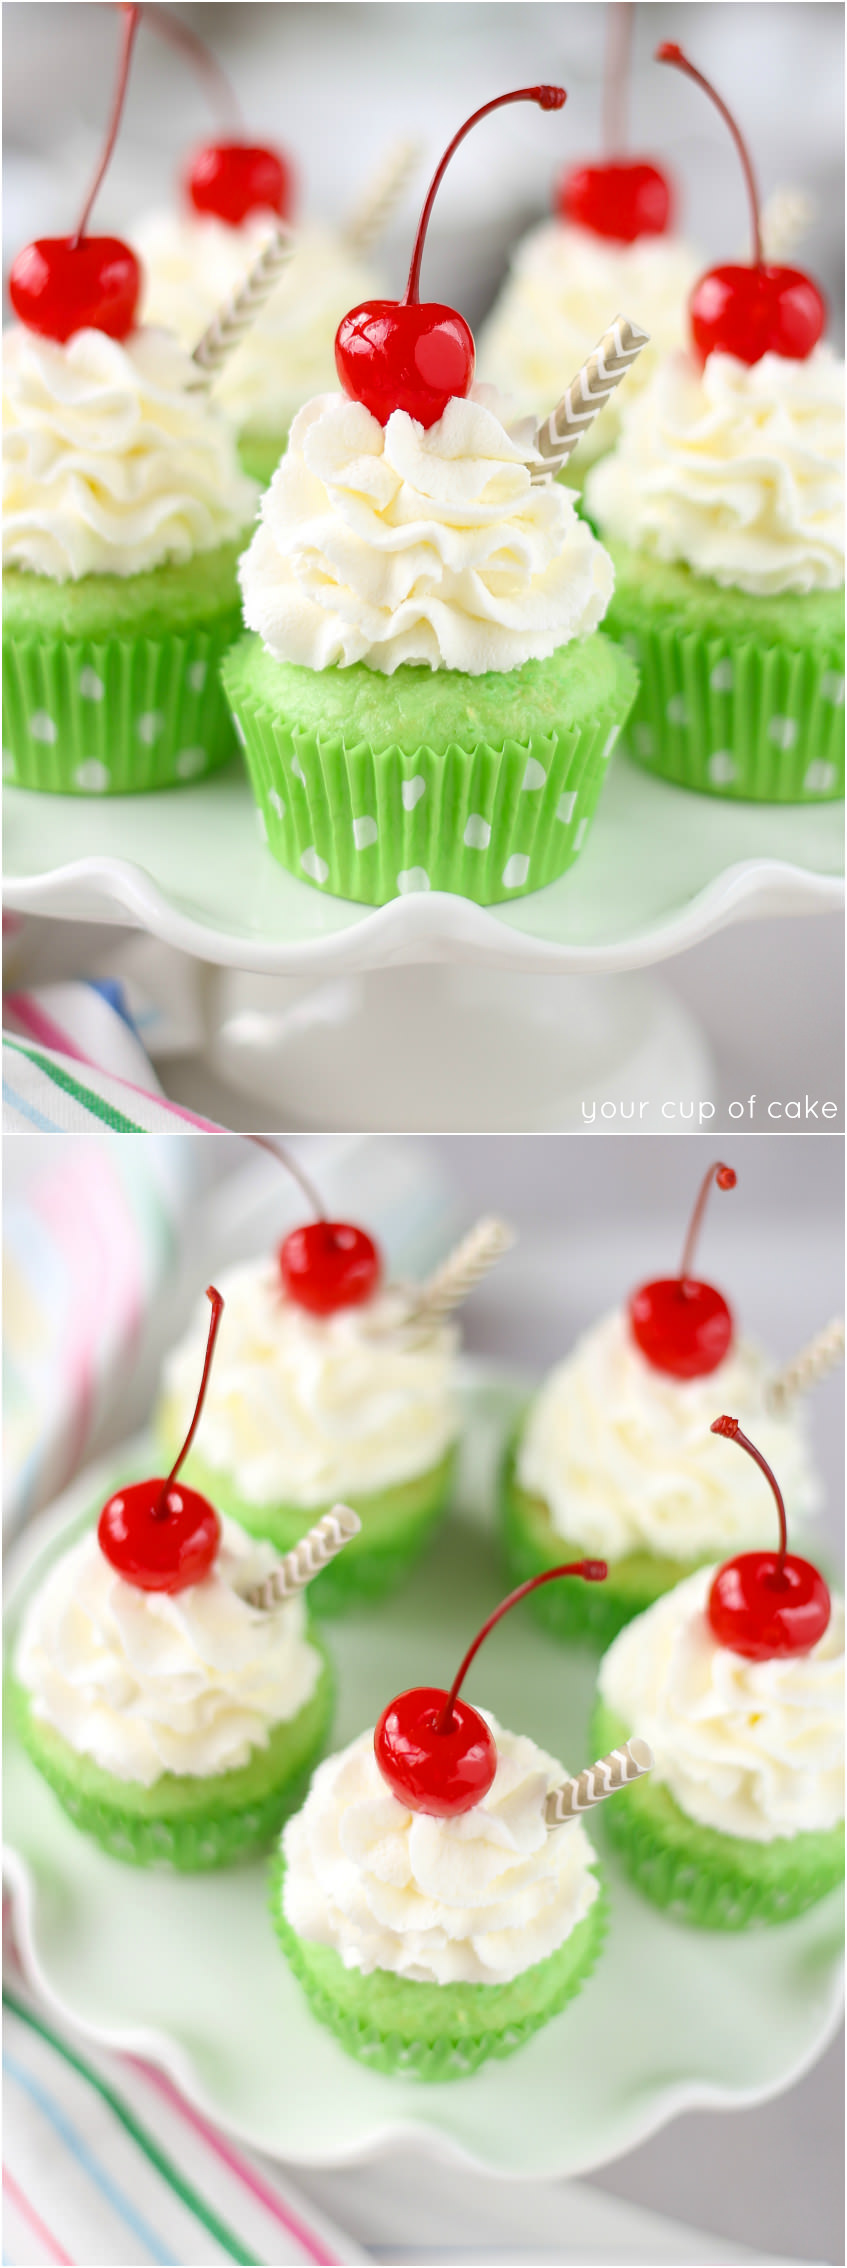 Patricks Day by Baking and Candy Cups 50 Shamrock Print Cupcake Liners Baking Cups STANDARD SIZE St 